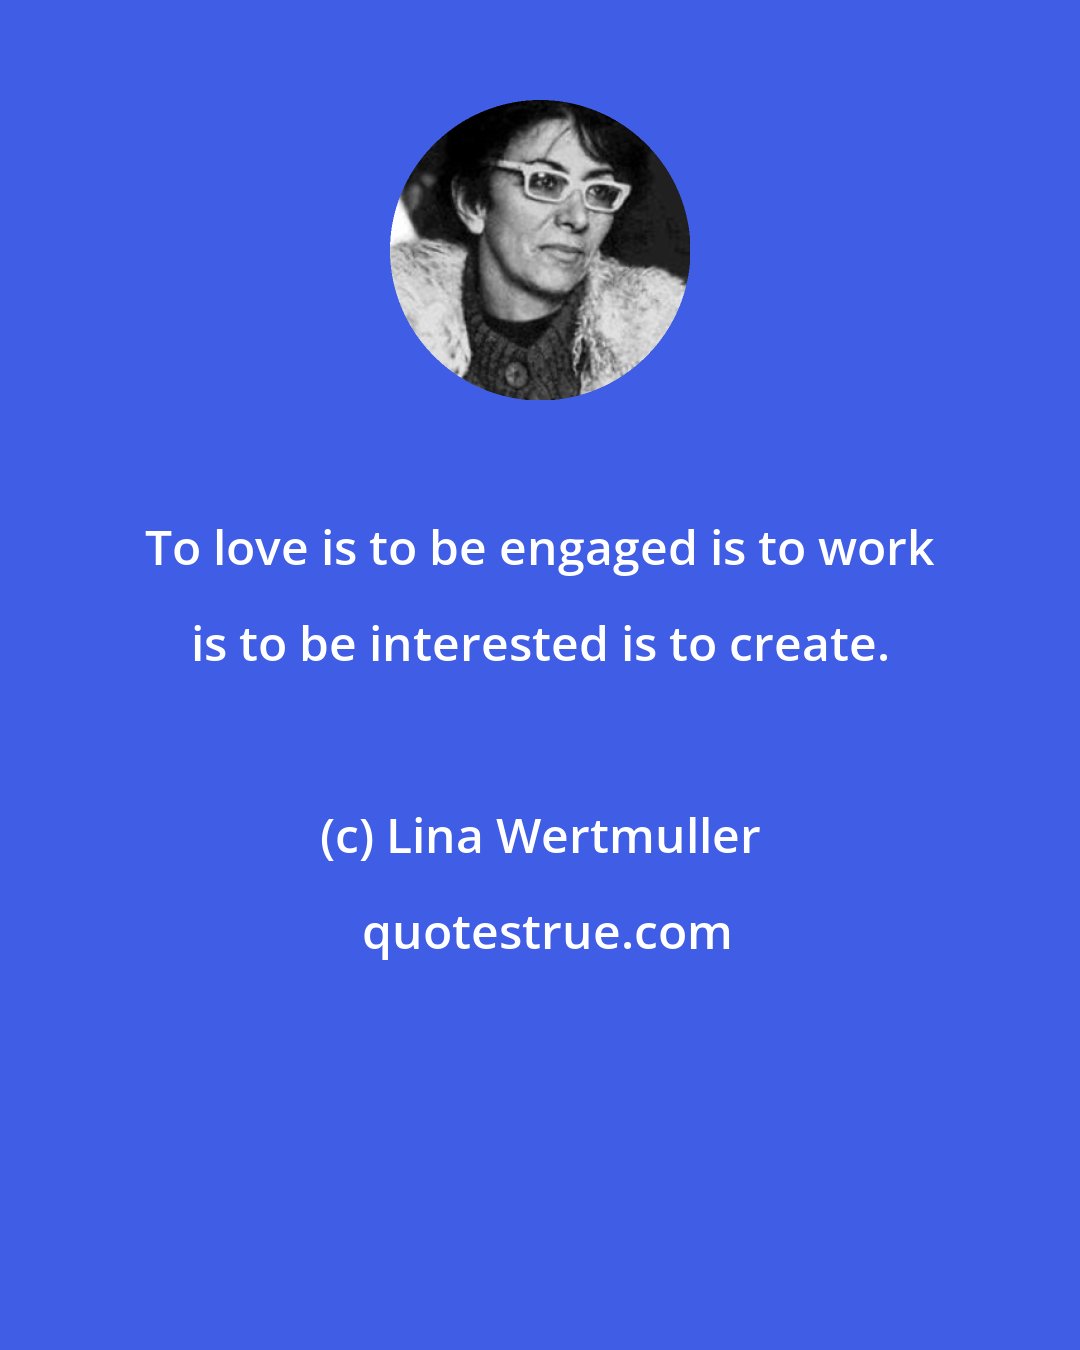 Lina Wertmuller: To love is to be engaged is to work is to be interested is to create.